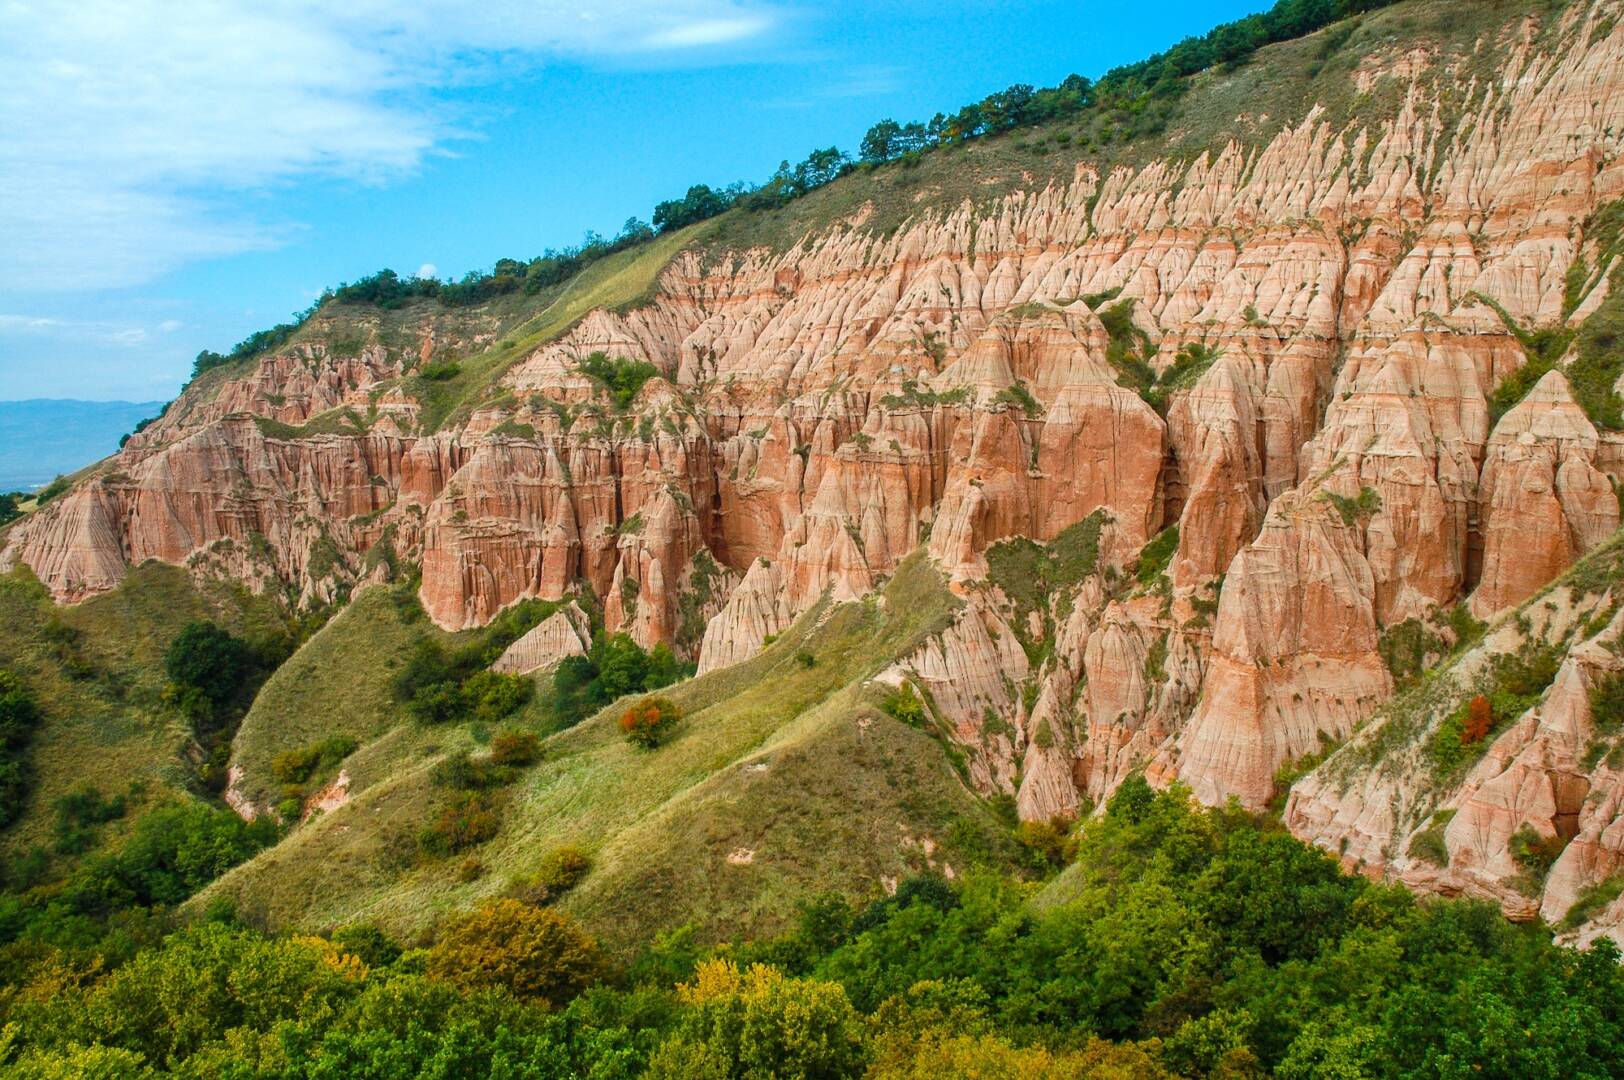 Succession of red and white clays with dinosaur fossils. Geological reserve of Rapa Rosia, Romania